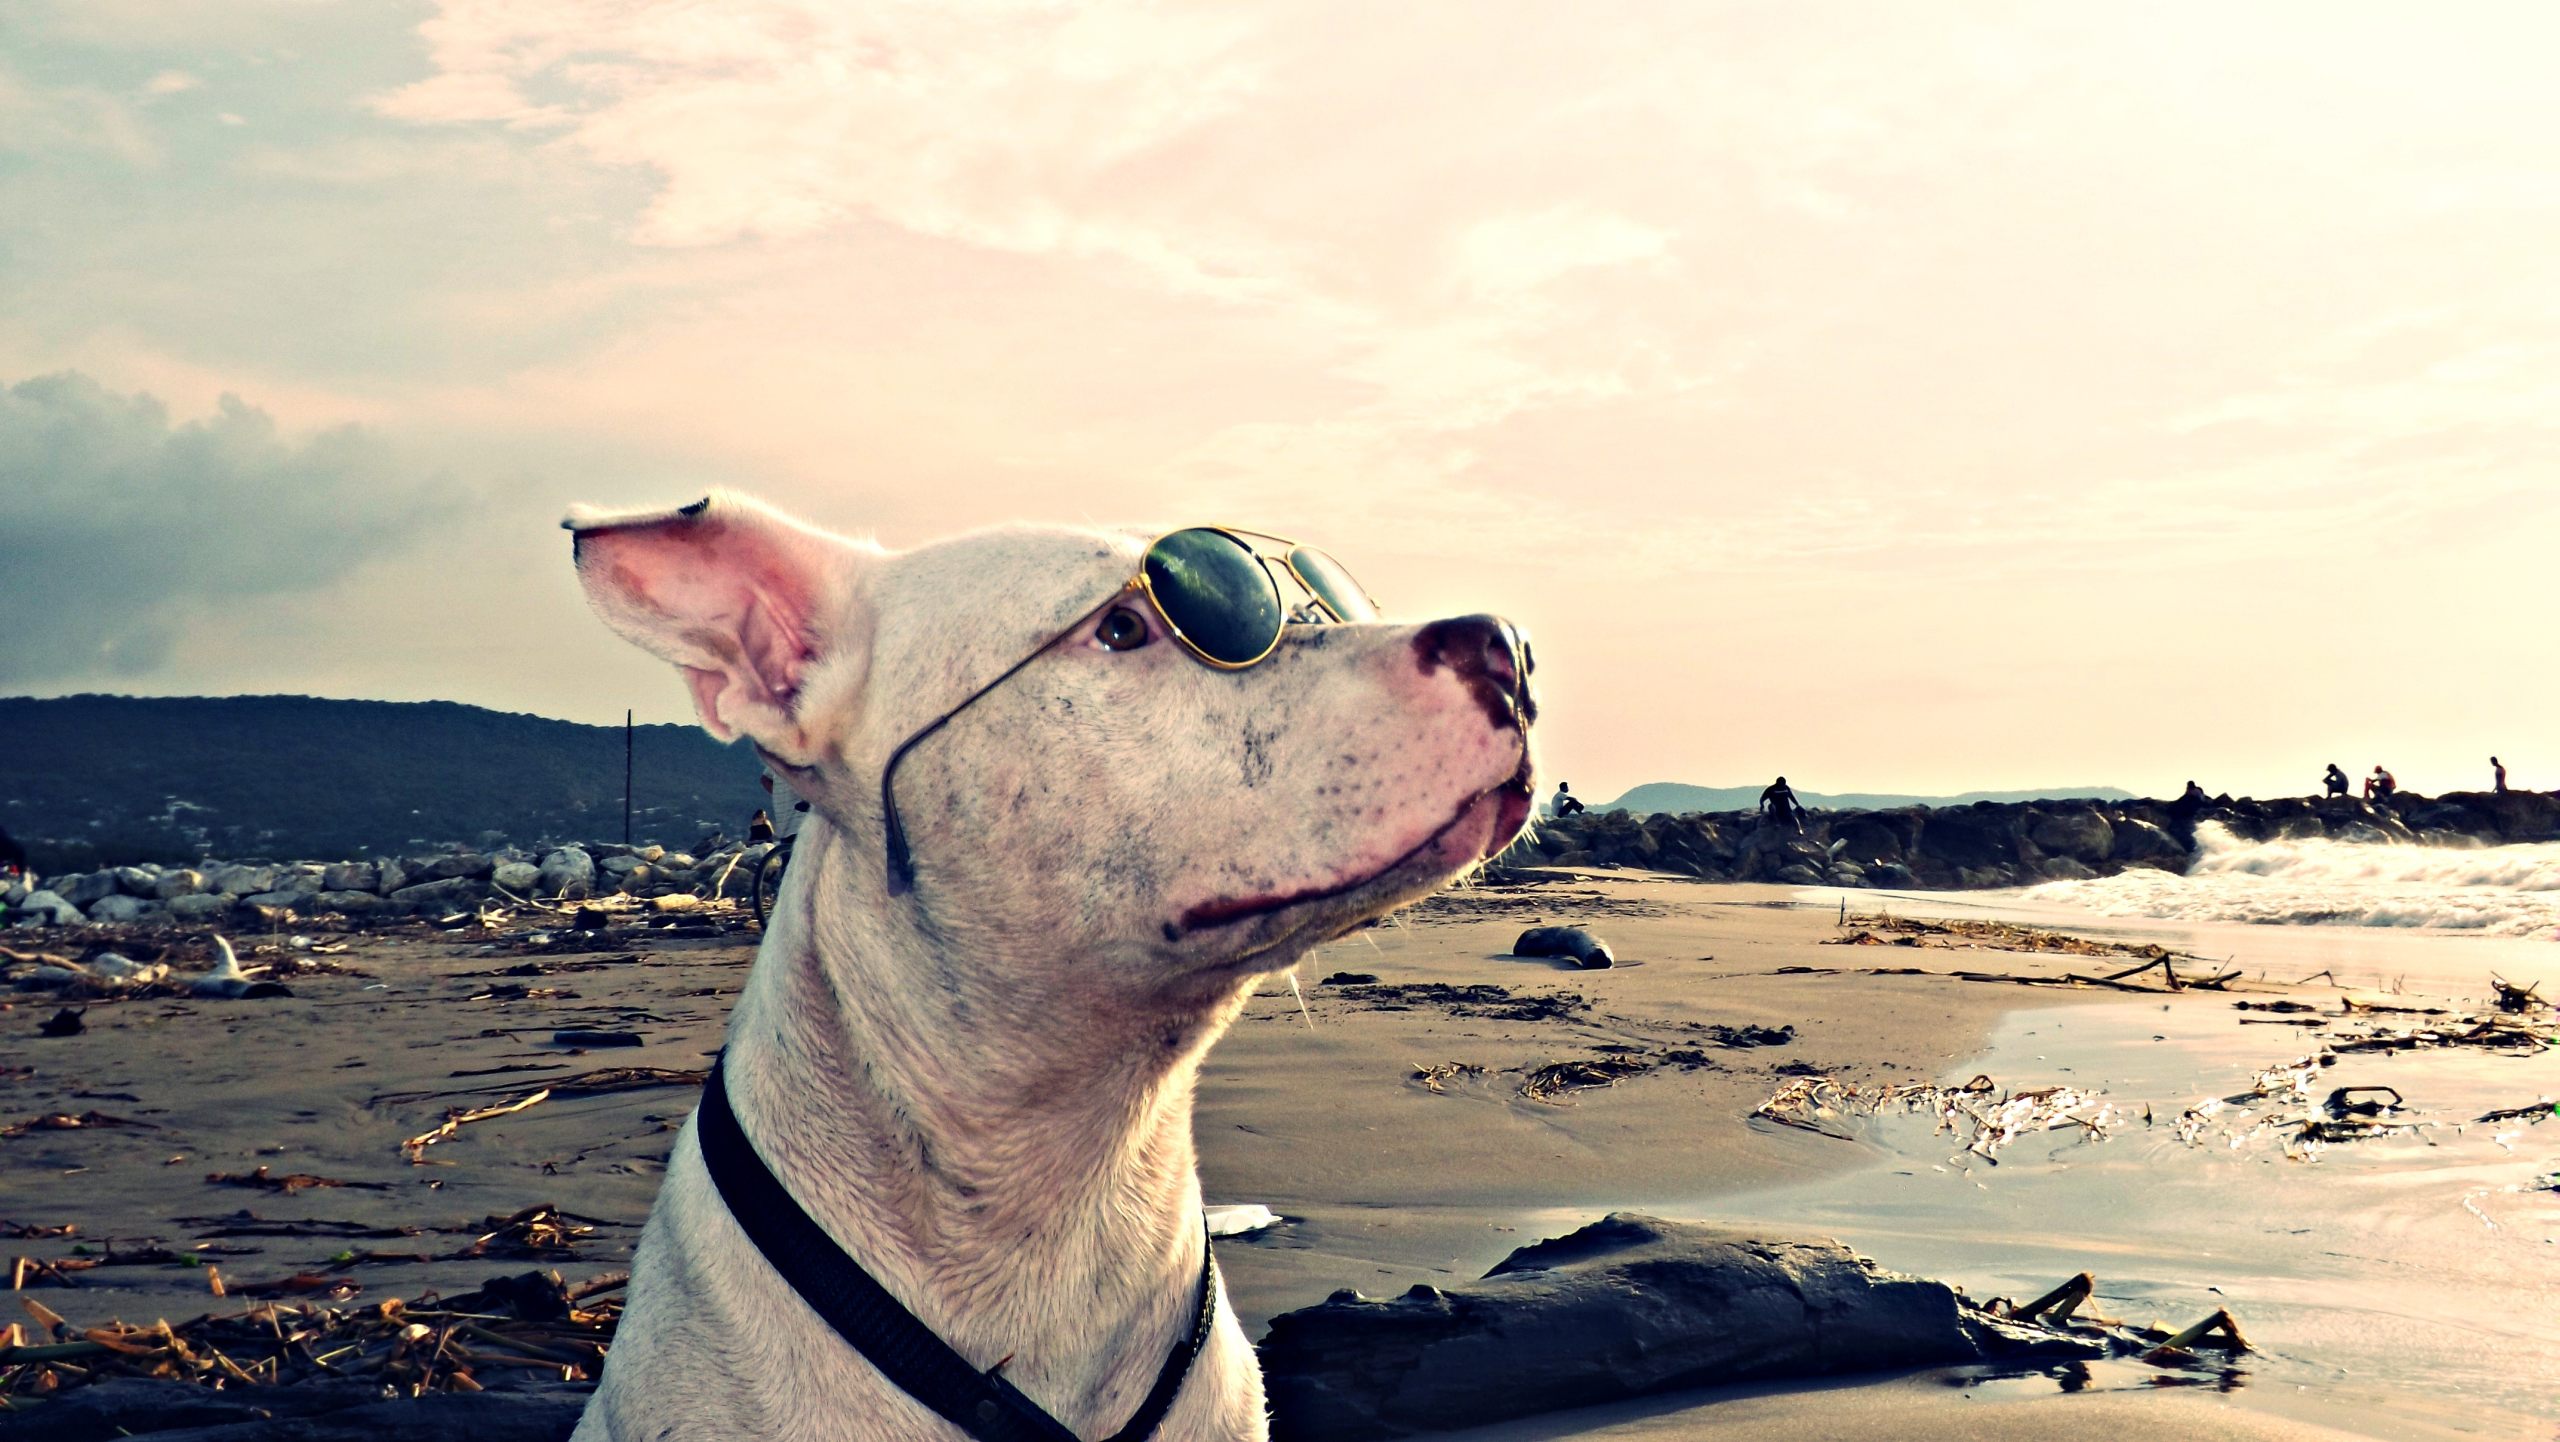 Cool Pitbull Dog Wallpaper With Sea Beach Background - Malaysia Pet Travel Place - HD Wallpaper 